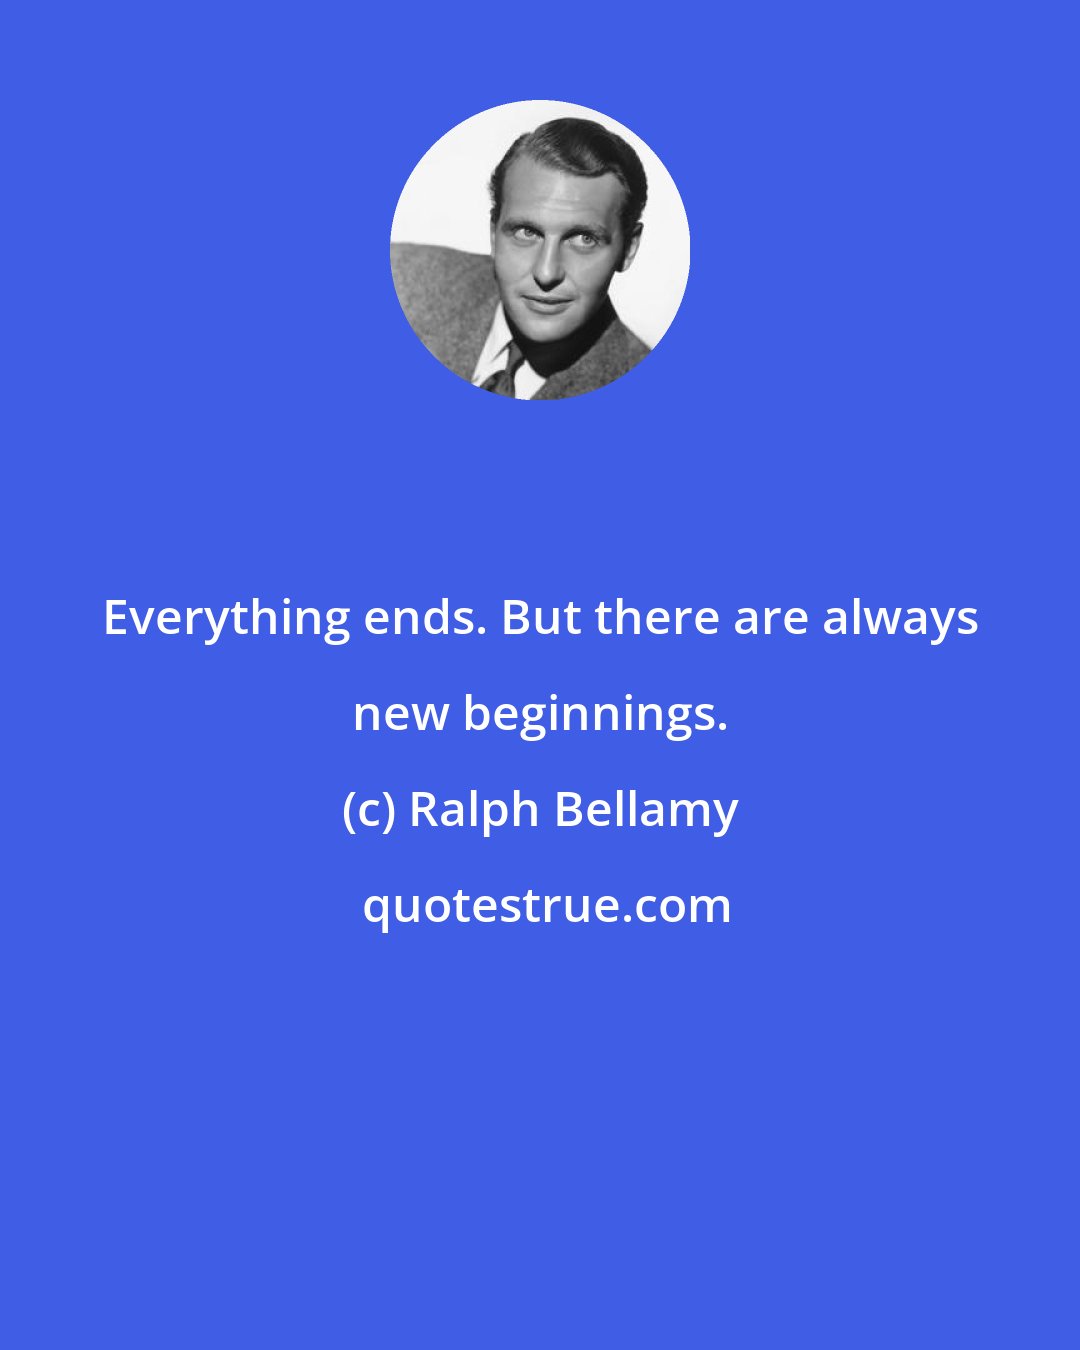 Ralph Bellamy: Everything ends. But there are always new beginnings.